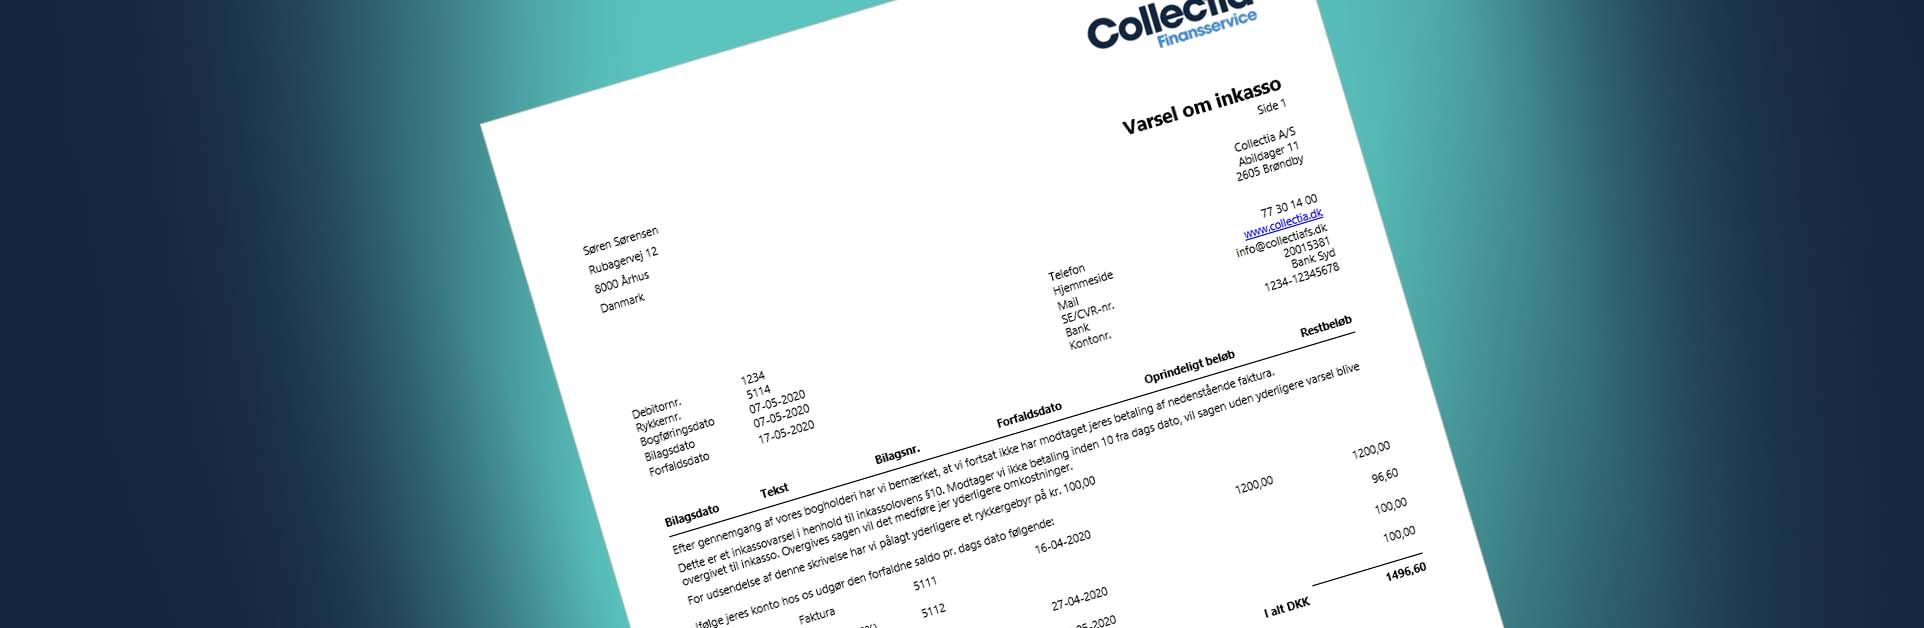 Send a debt collection notice - The ultimate guide - Collectia